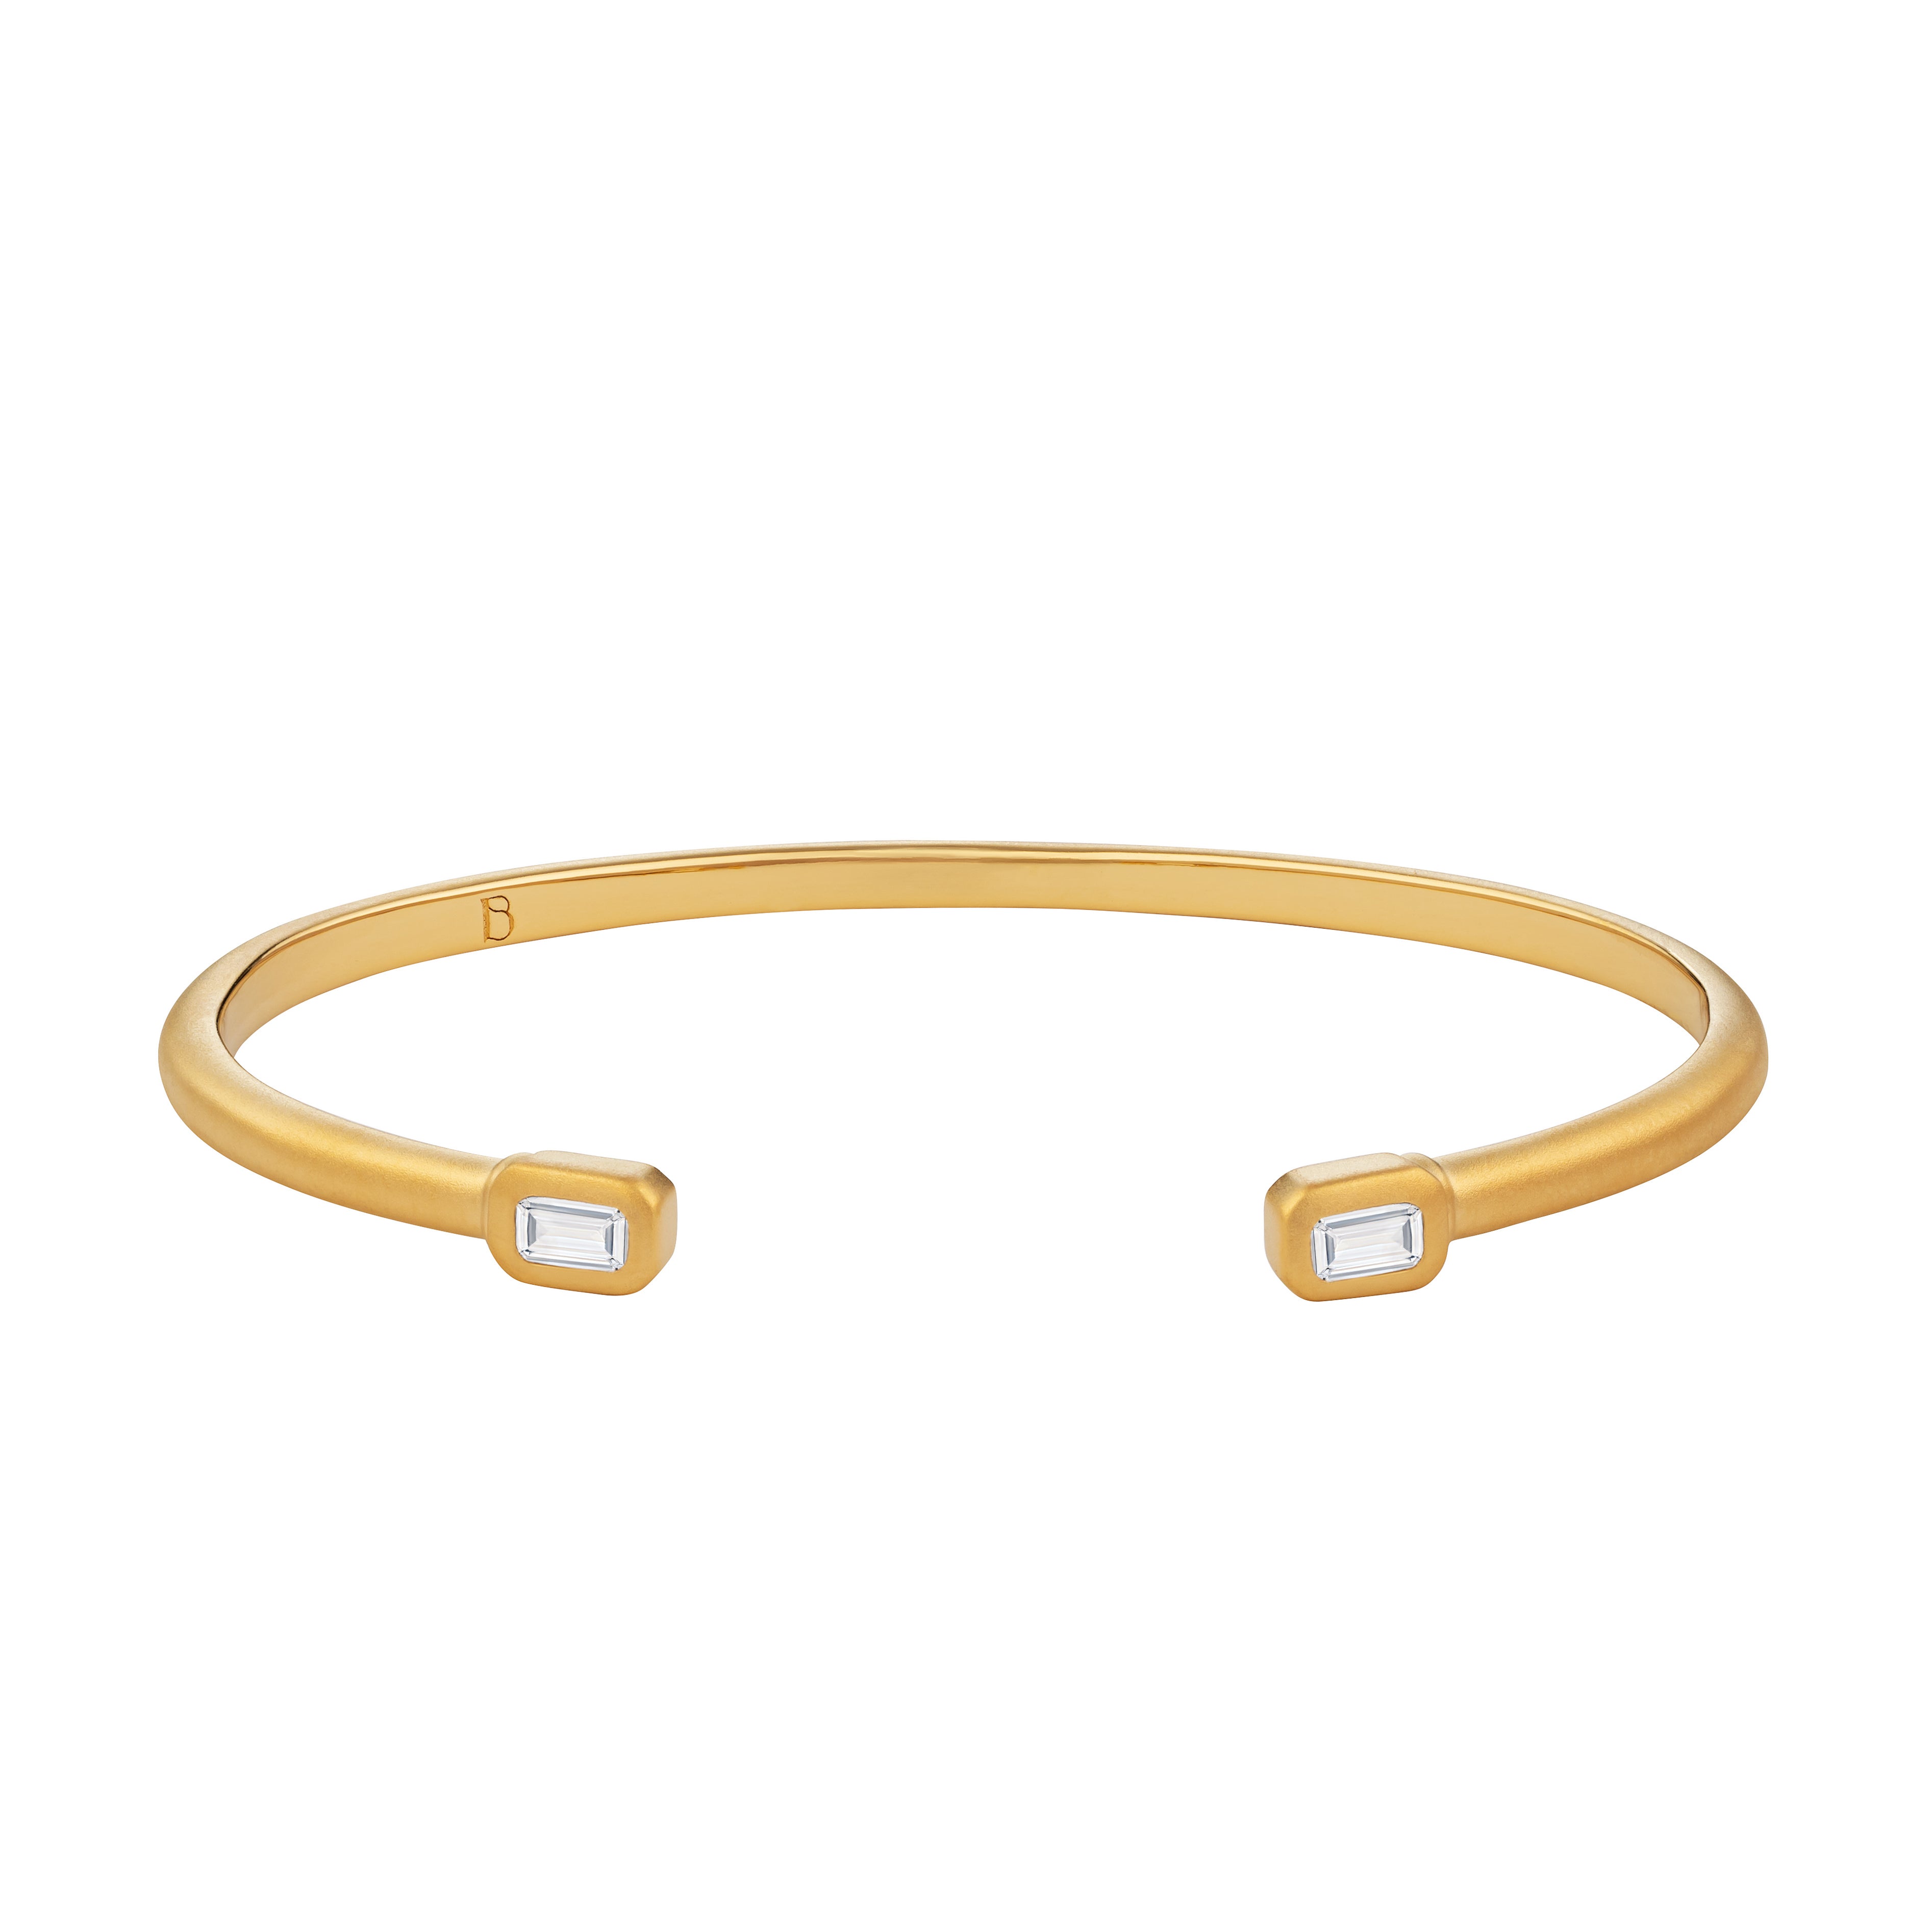 Signature Thin Bangle in 18k Gold Vermeil on Sterling Silver